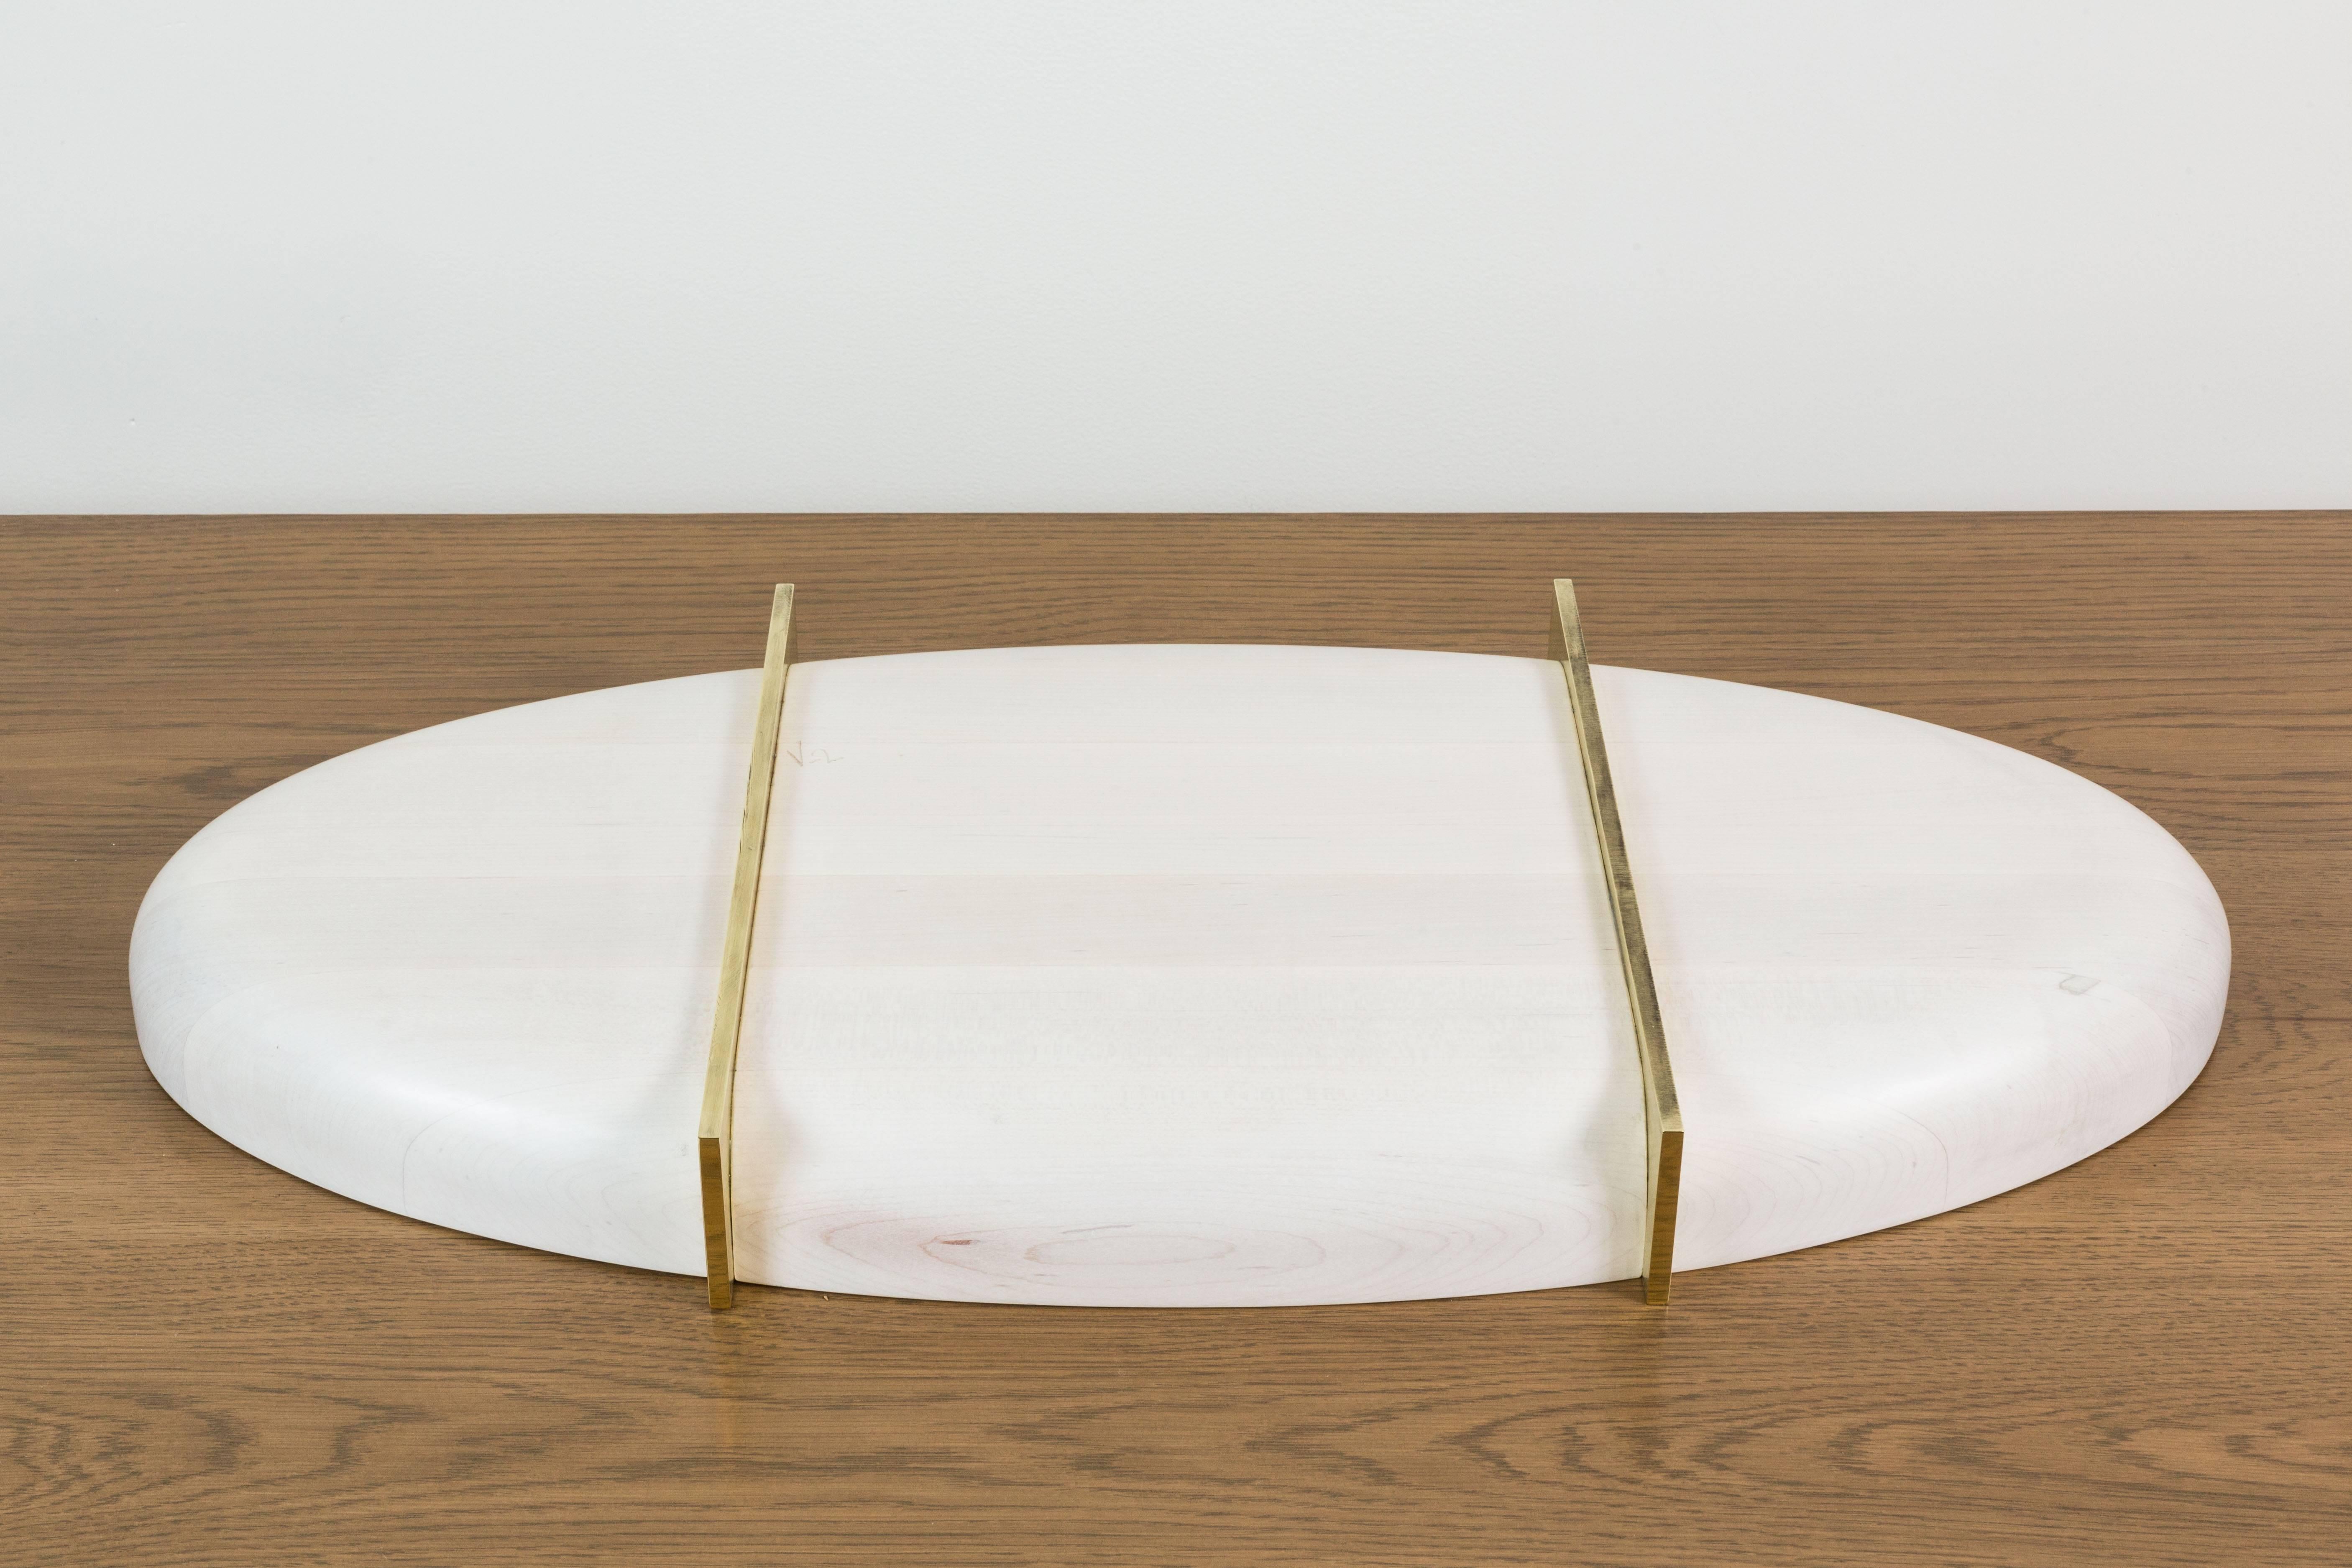 Contemporary Bleached Maple and Brass Oval Tray by Vincent Pocsik for Lawson-Fenning